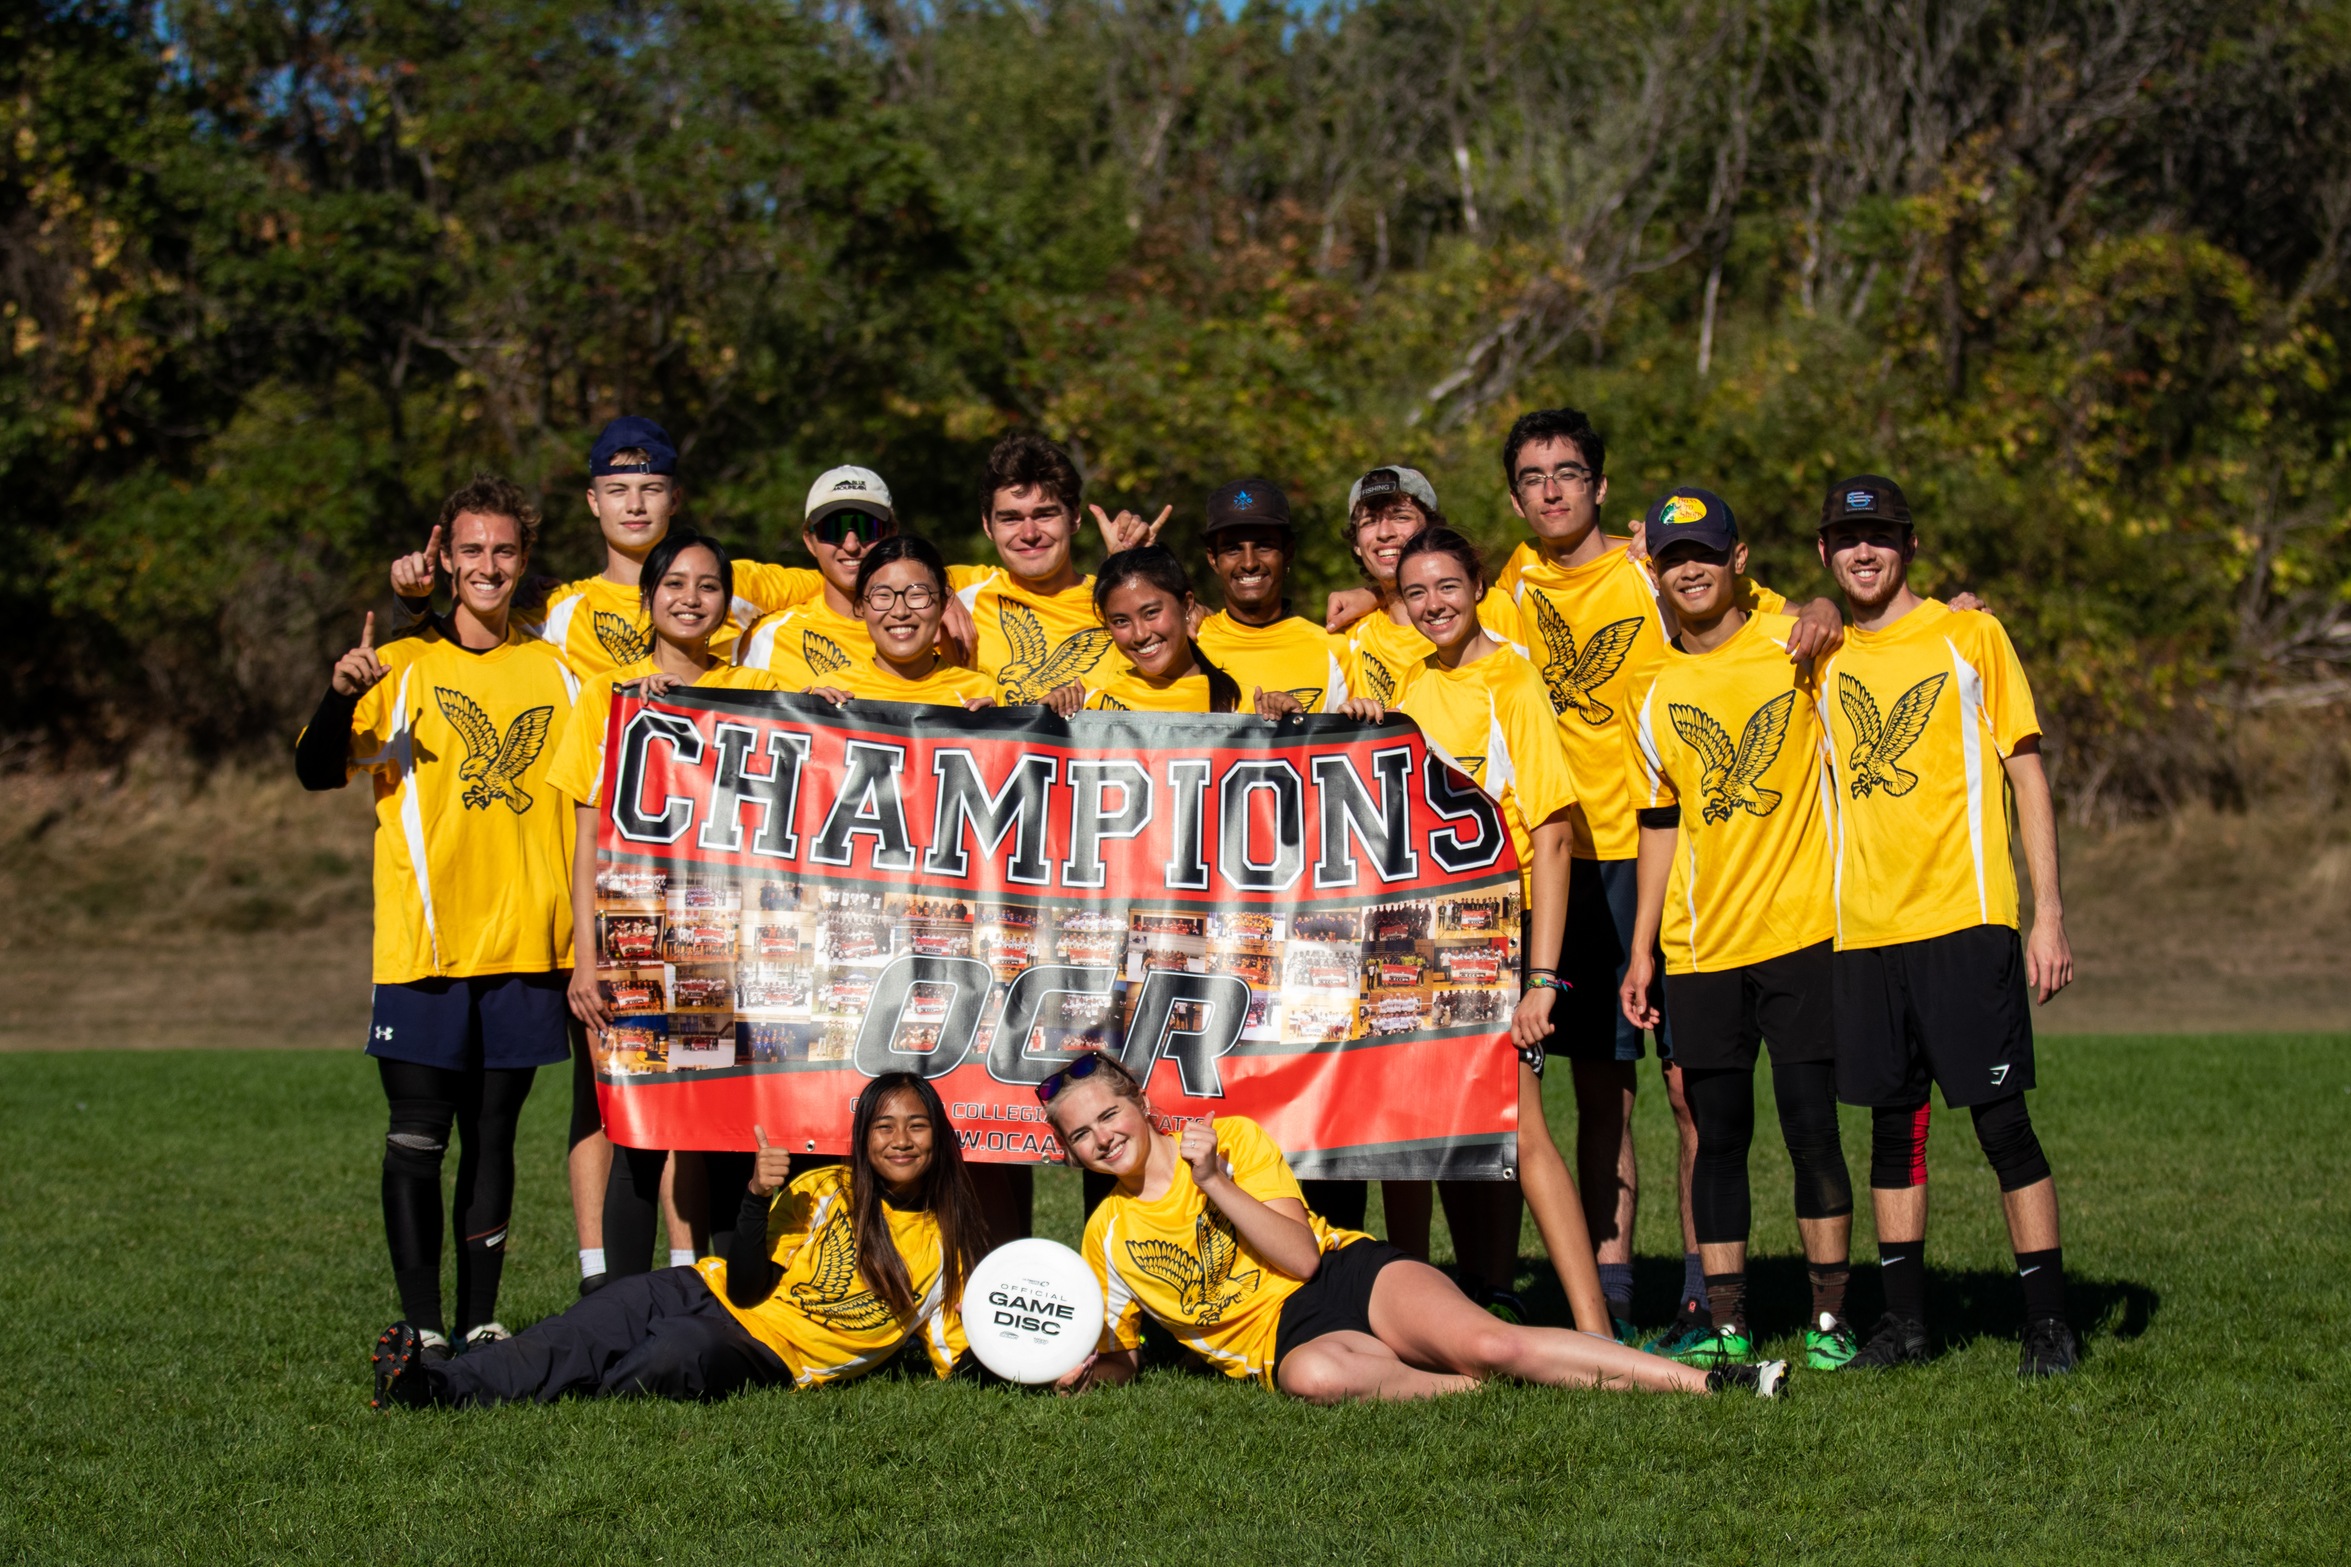 Humber Mixed Ultimate Frisbee Champions at UTM team photo